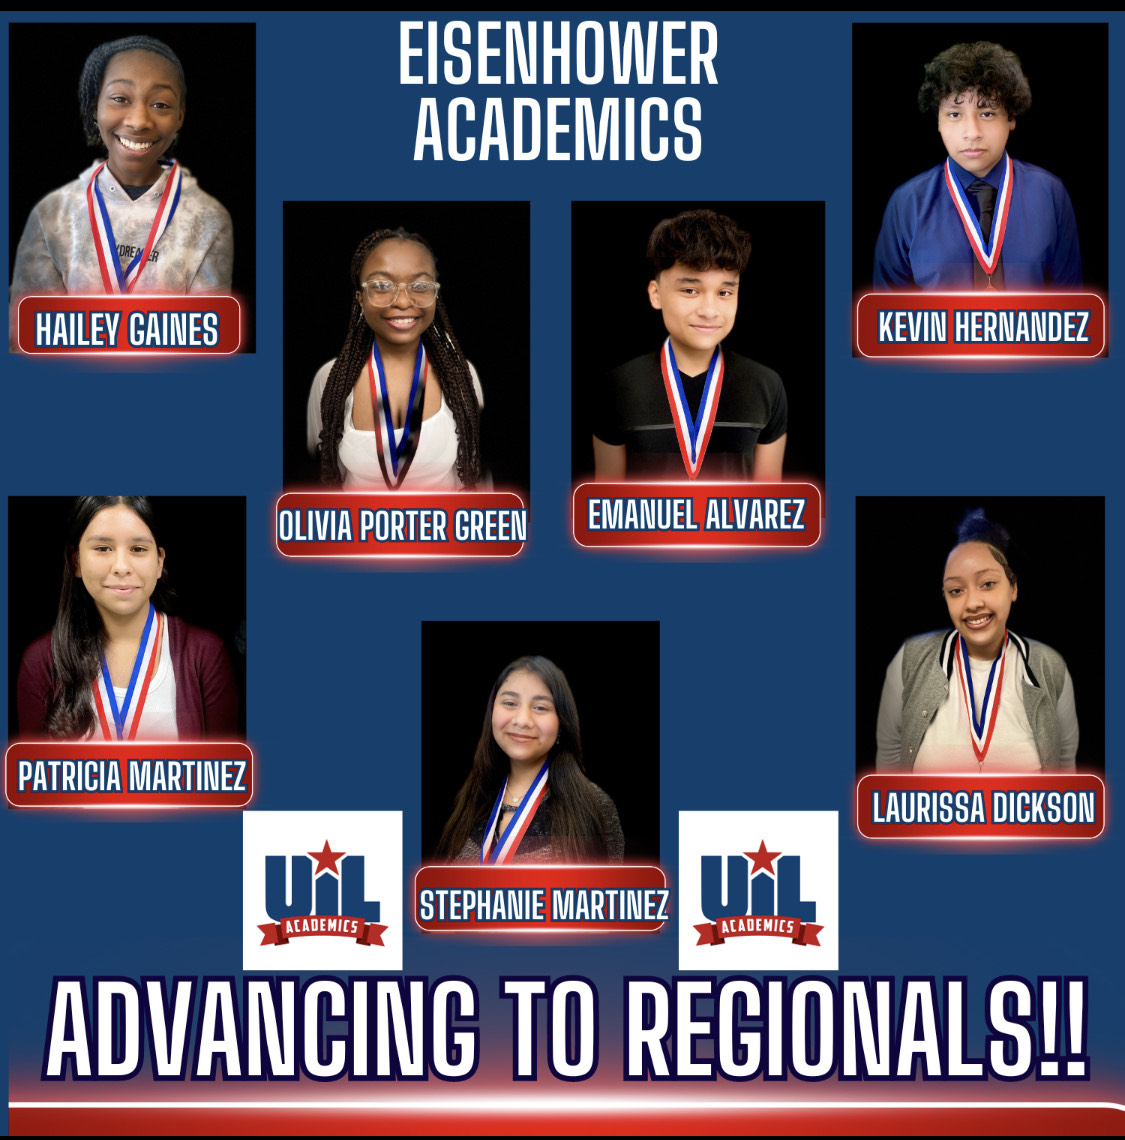 Congratulations to our academic students who showcased their talents and achieved success at the UIL district meet held Saturday, April 6th, at Spring High School. We'll see you at regionals! #swoopswoop @Darrell88Ross